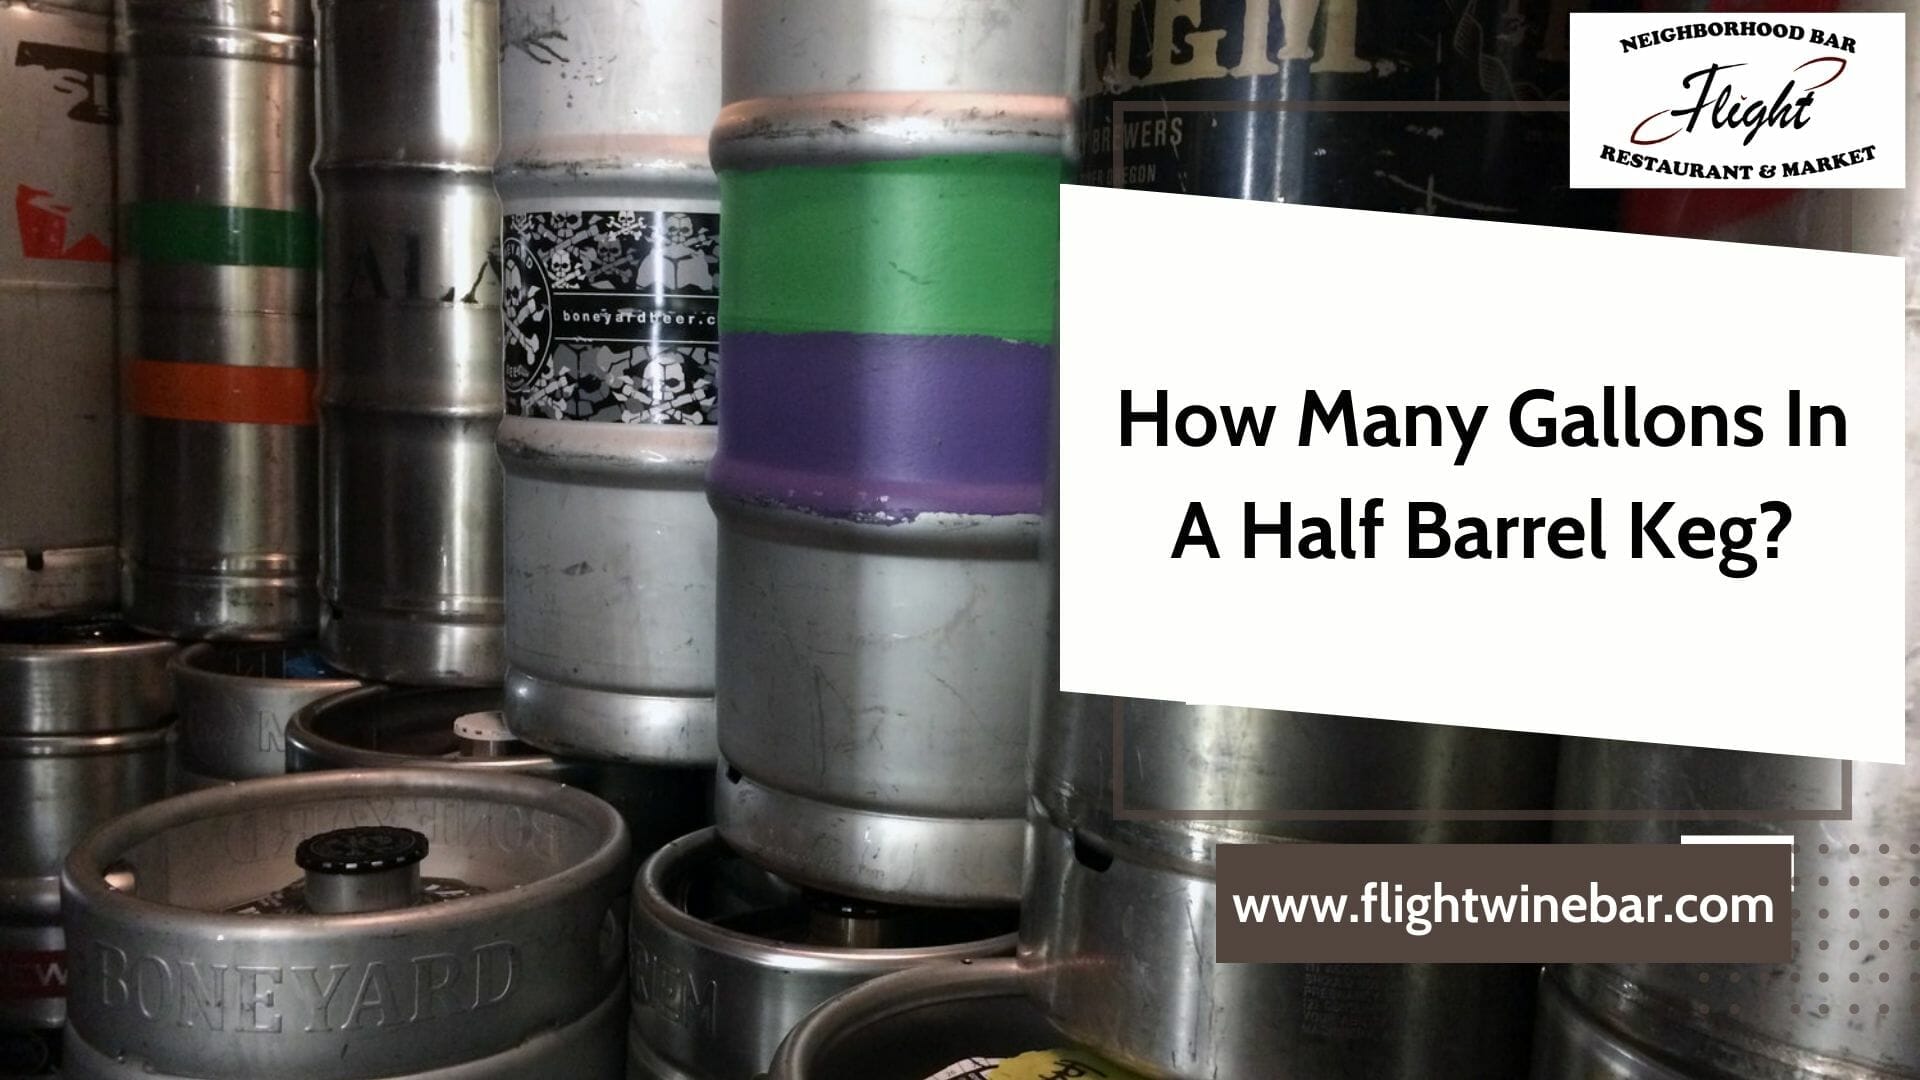 How Many Gallons In A Half Barrel Keg